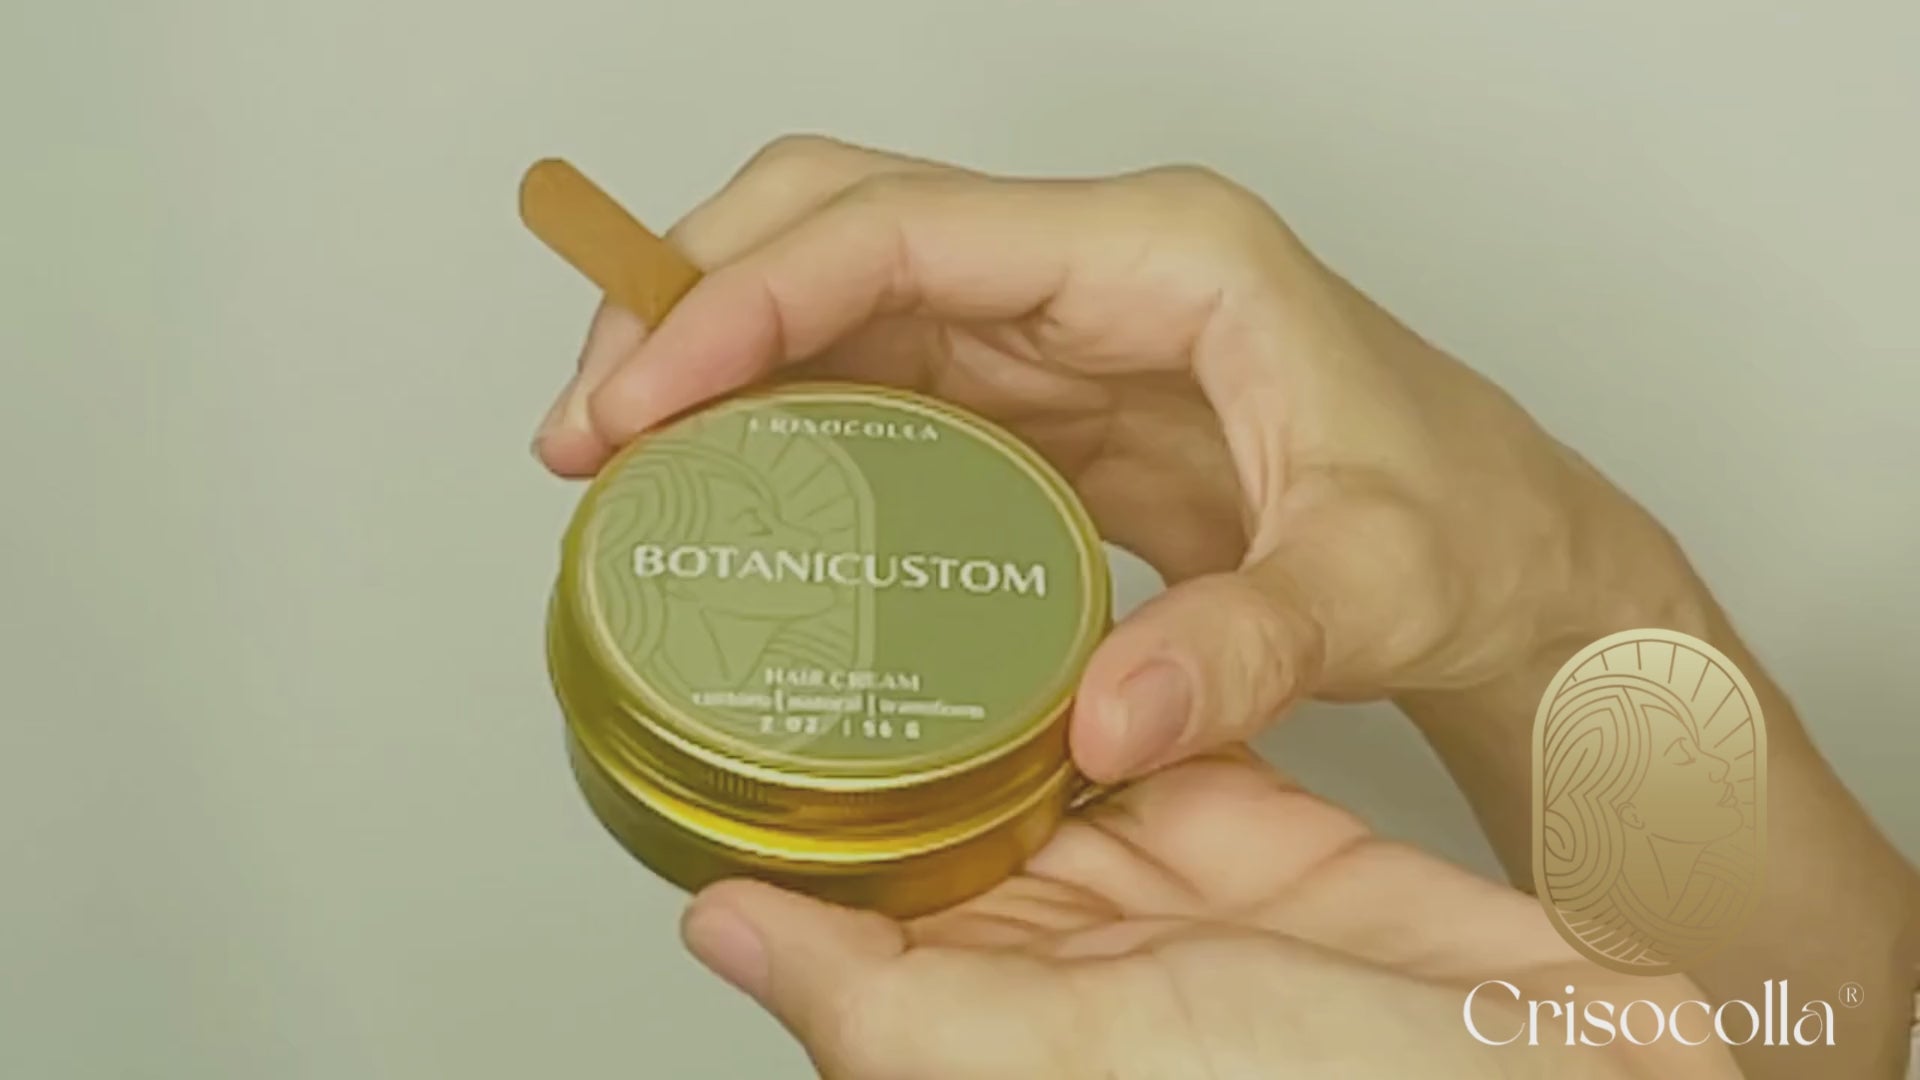 Video: Demonstrating how to apply BotaniCustom Hair Cream for nourished and beautiful hair.